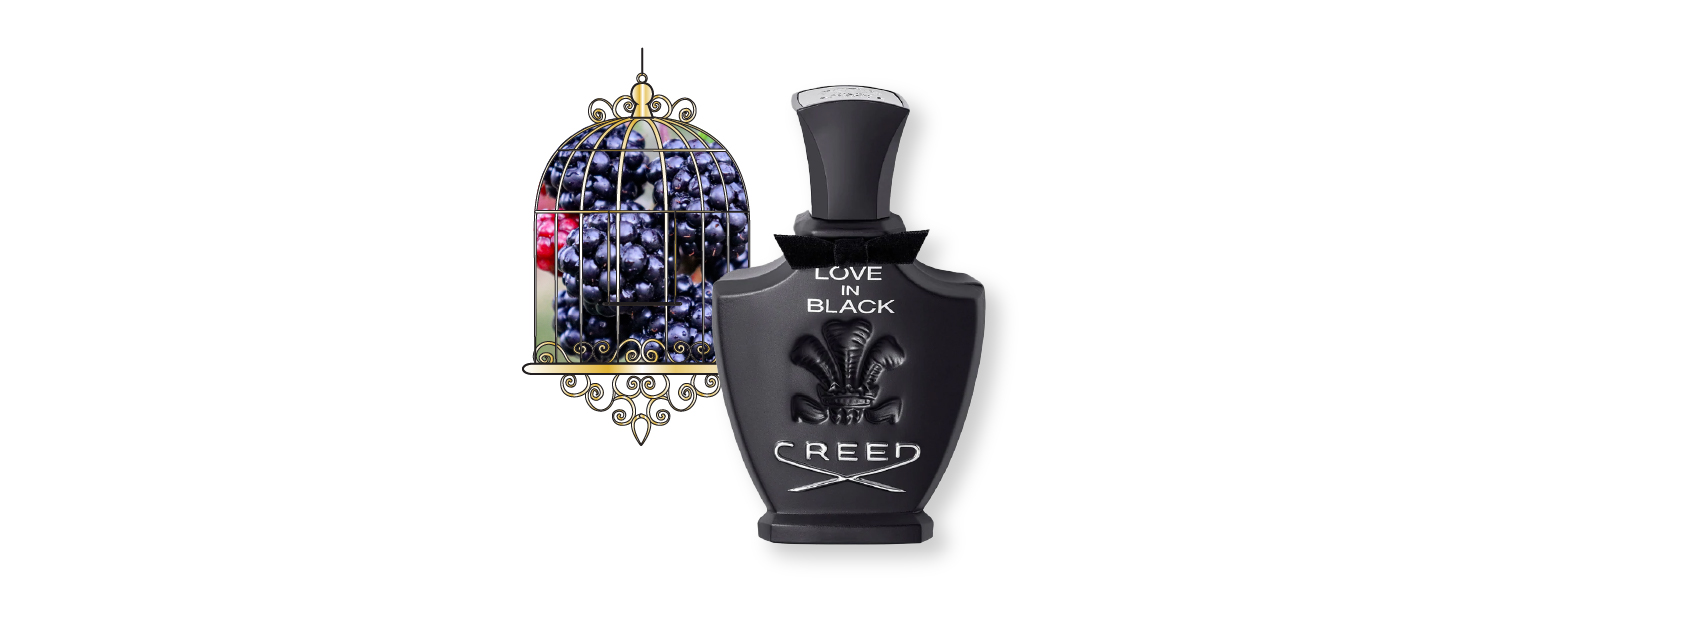 bottle of love in black by creed with a photo of blackcurrants behind a golden cage